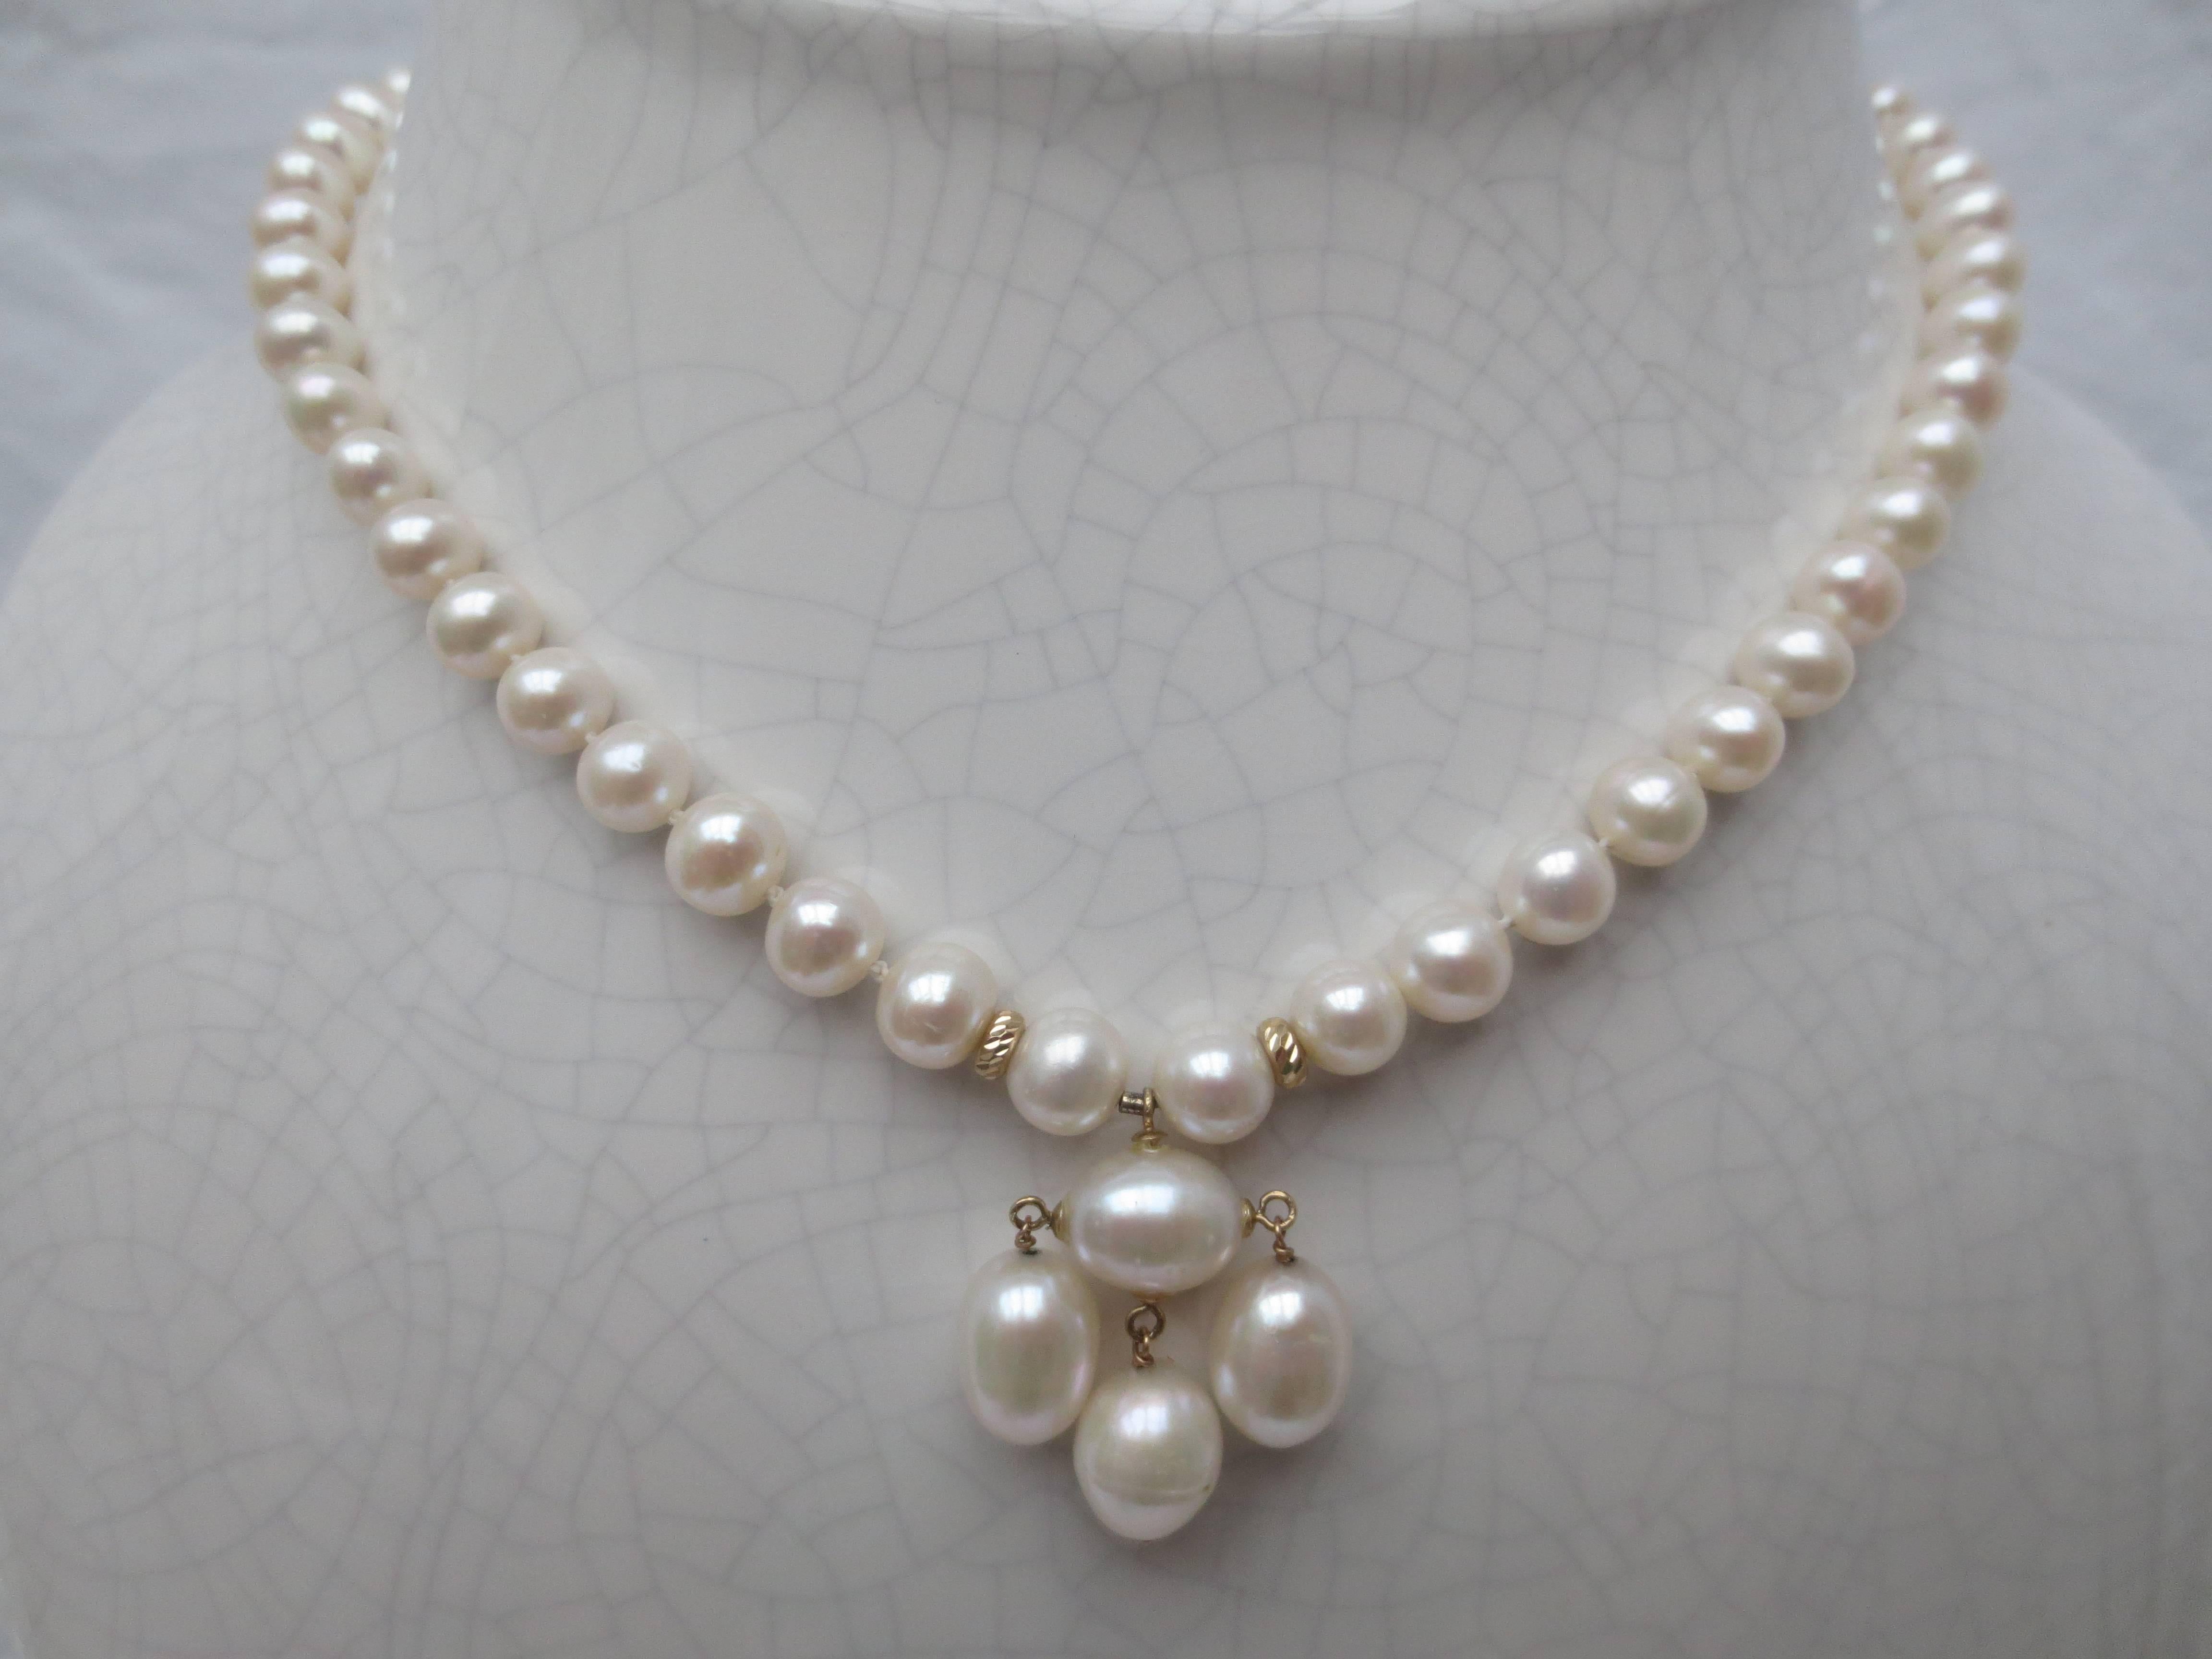 Simple yet gorgeous Graduated Pearl Necklace, hand made by Marina J. This all Pearl necklace features high luster white Pearls that display a beautiful iridescent sheen ranging from 1.5mm - 7mm. Measuring 16.5 inches long, this necklace meets at a